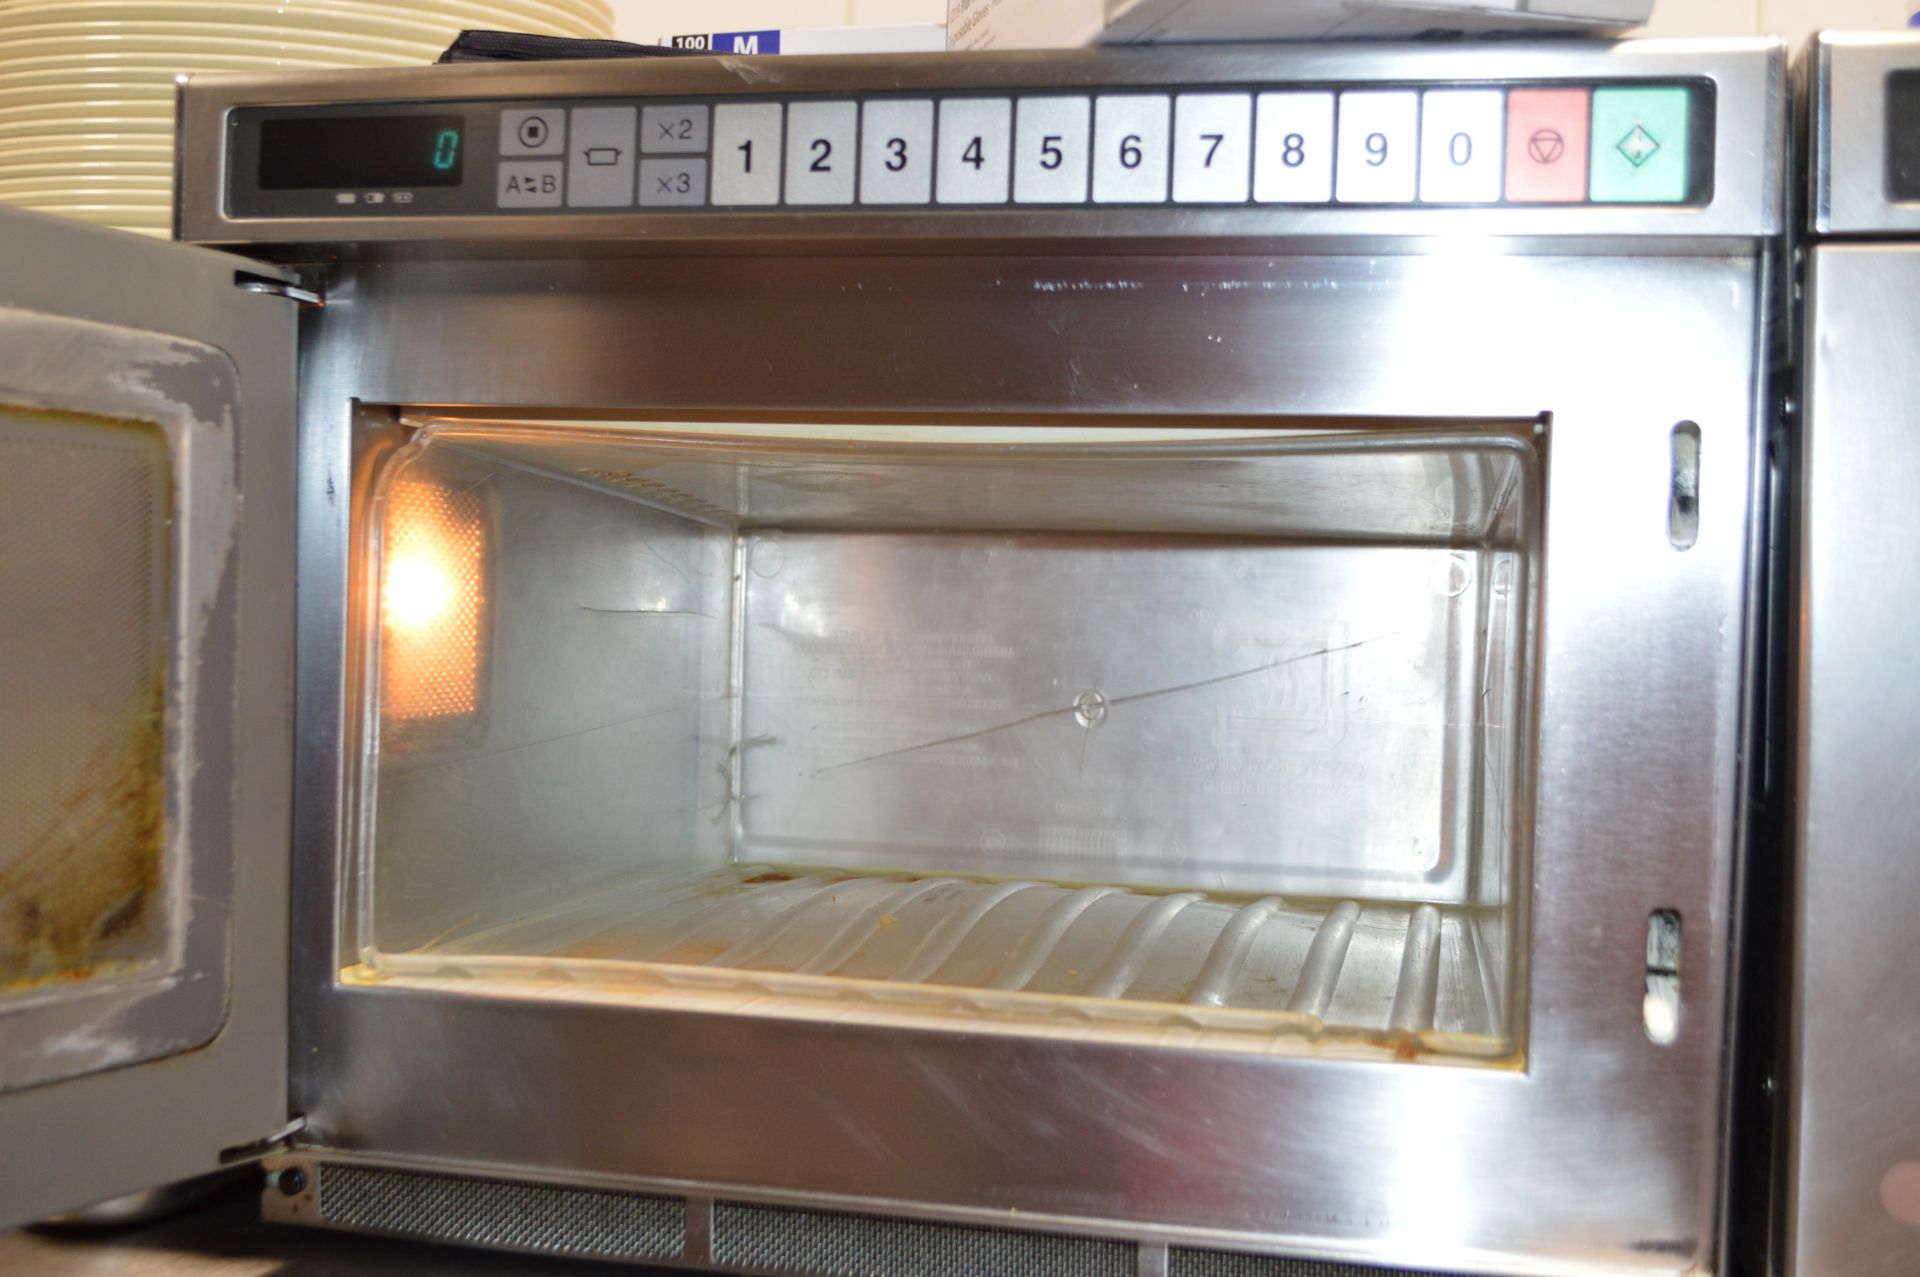 1 x Panasonic Commercial Microwave Oven With Stainless Steel Exterior and Wall Mounted Shelf - Ref - Image 2 of 2